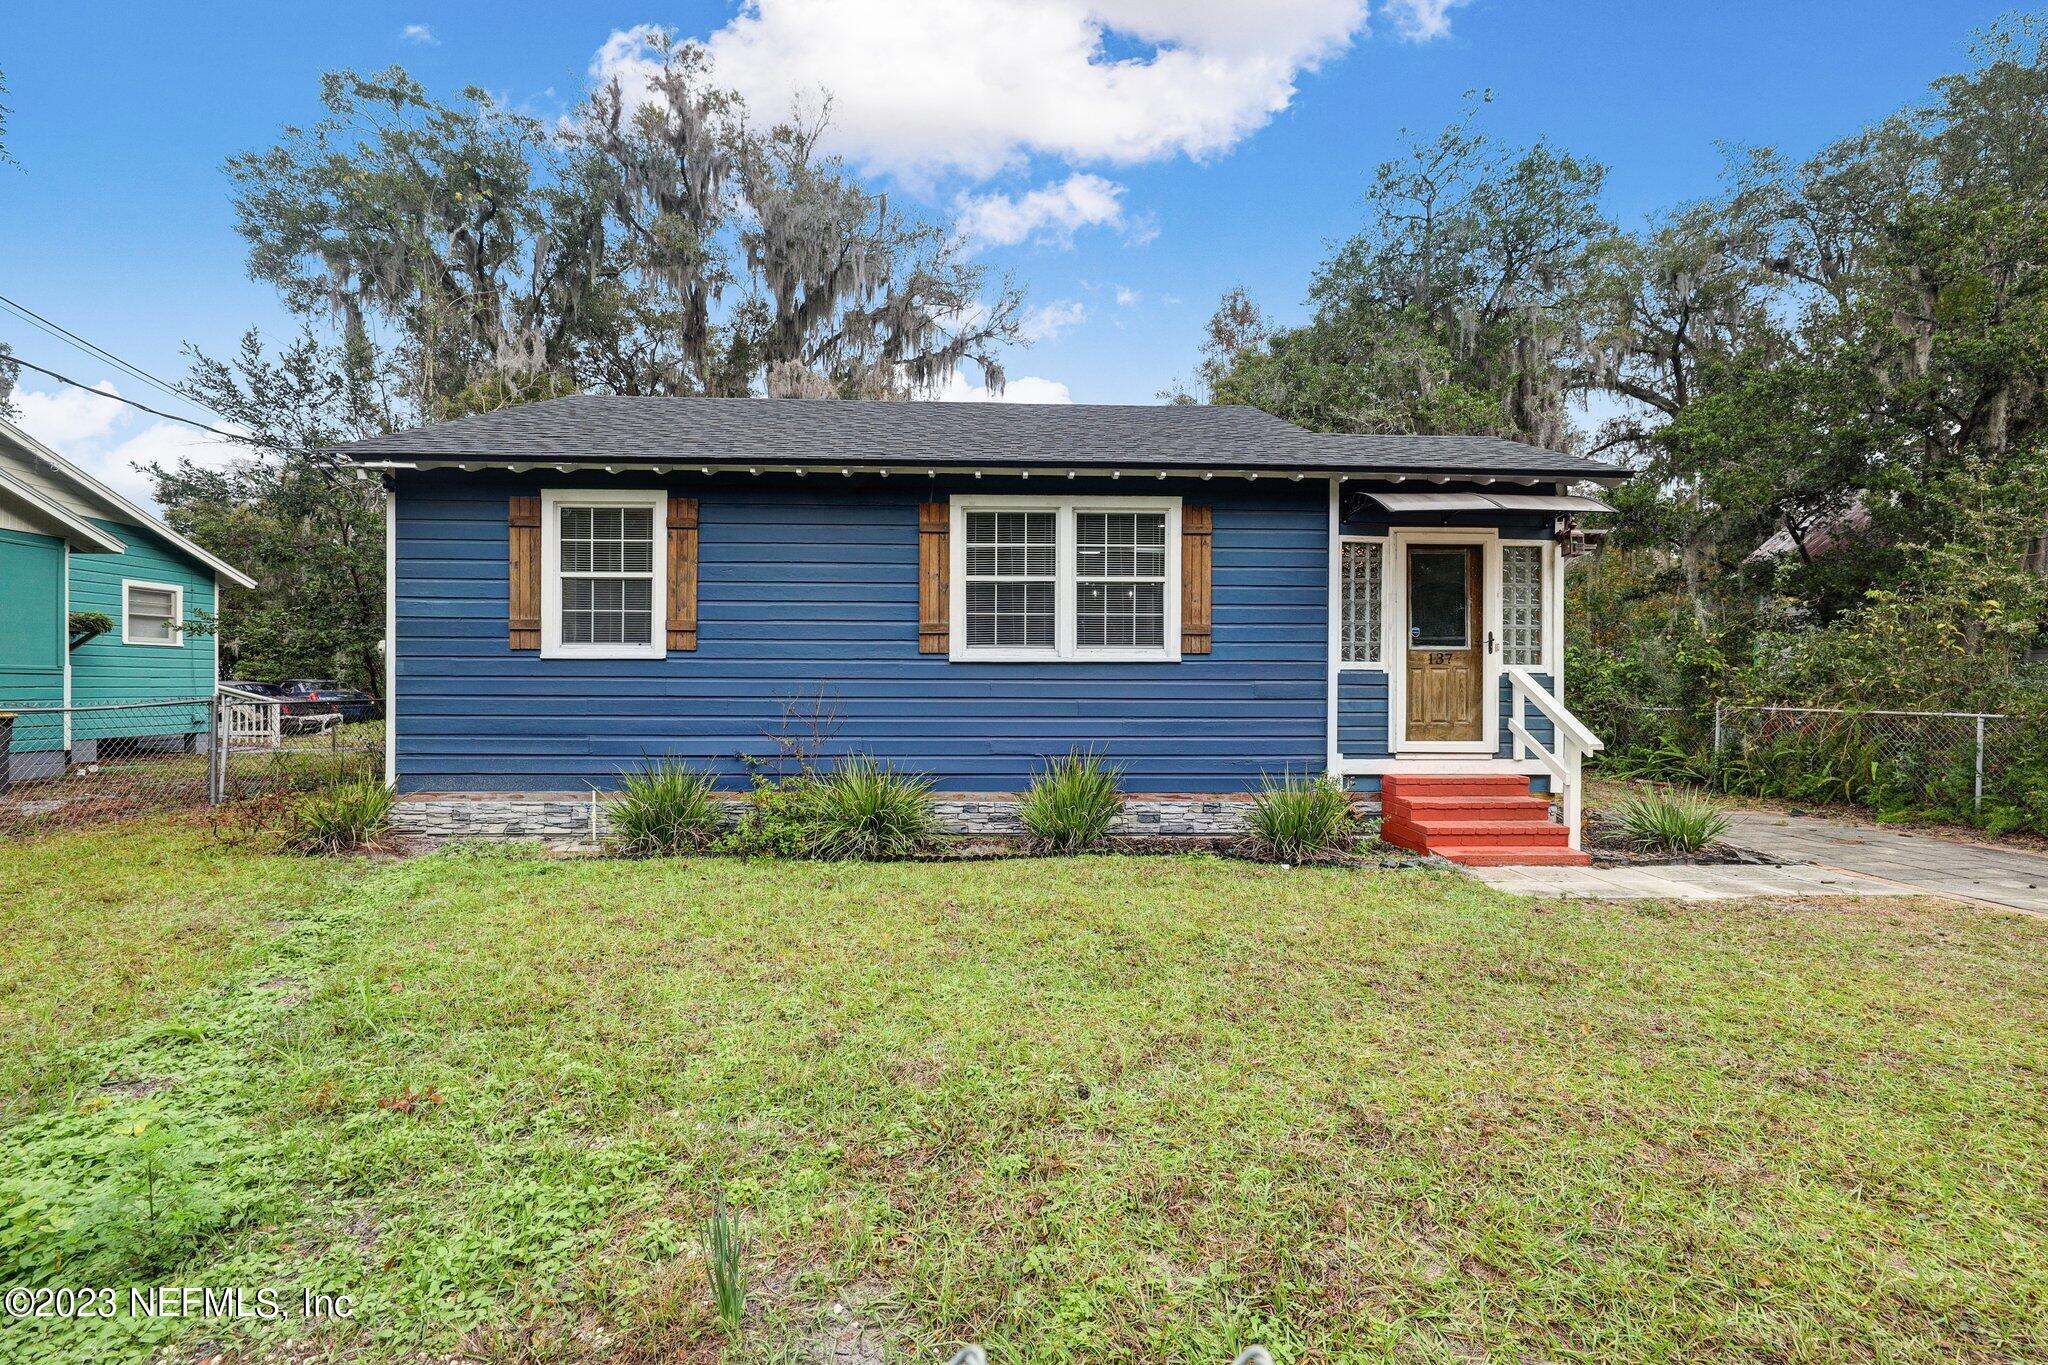 Jacksonville, FL home for sale located at 137 W 25TH Street, Jacksonville, FL 32206